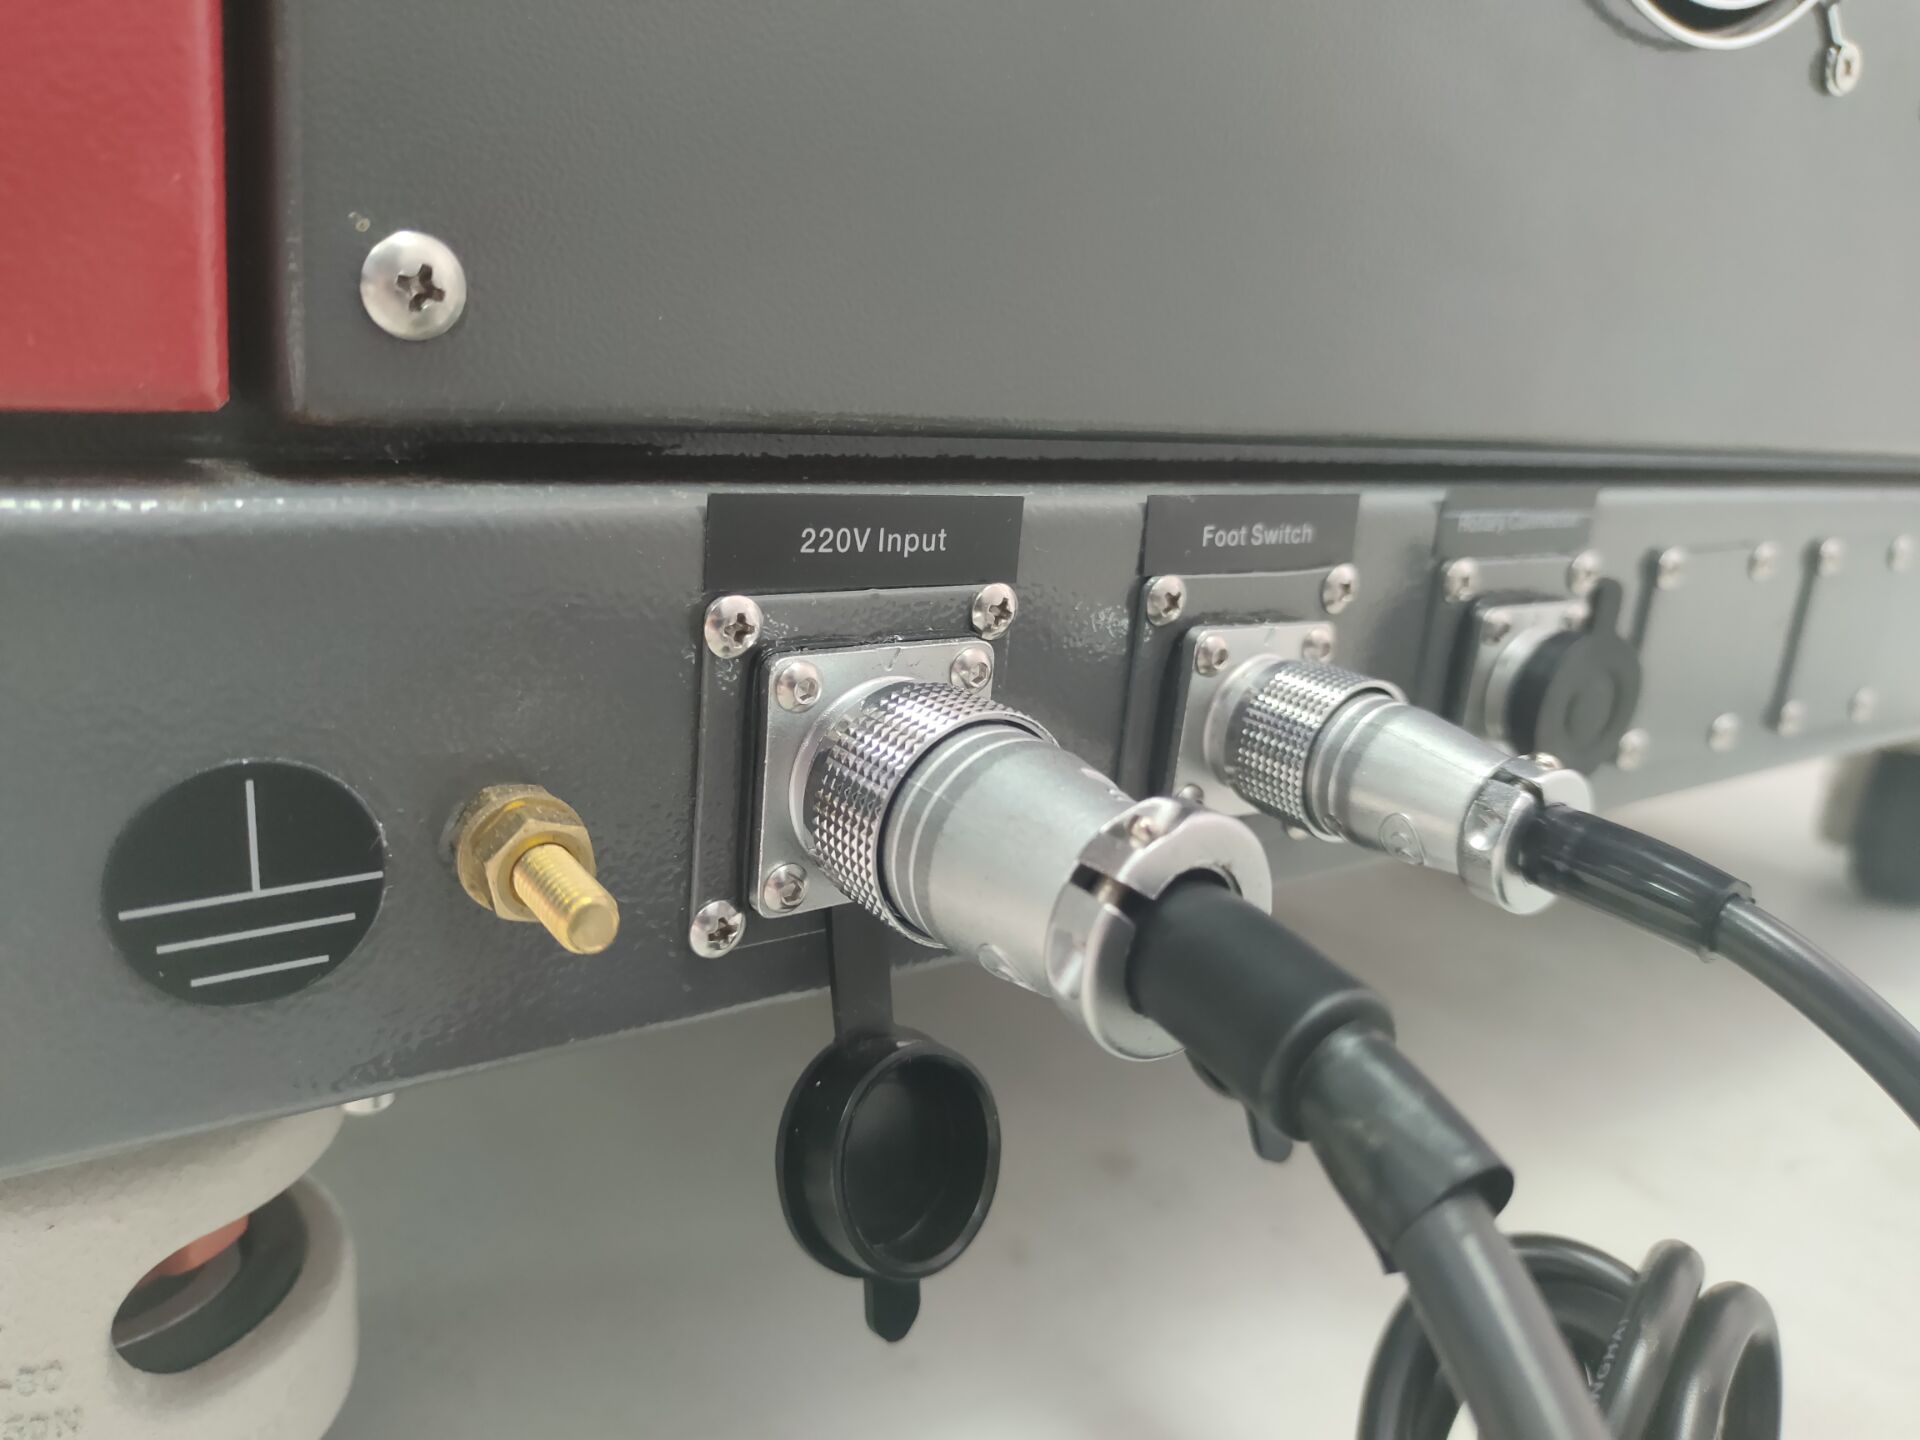 How To Connect The Ground Wire Of The Laser Equipment?